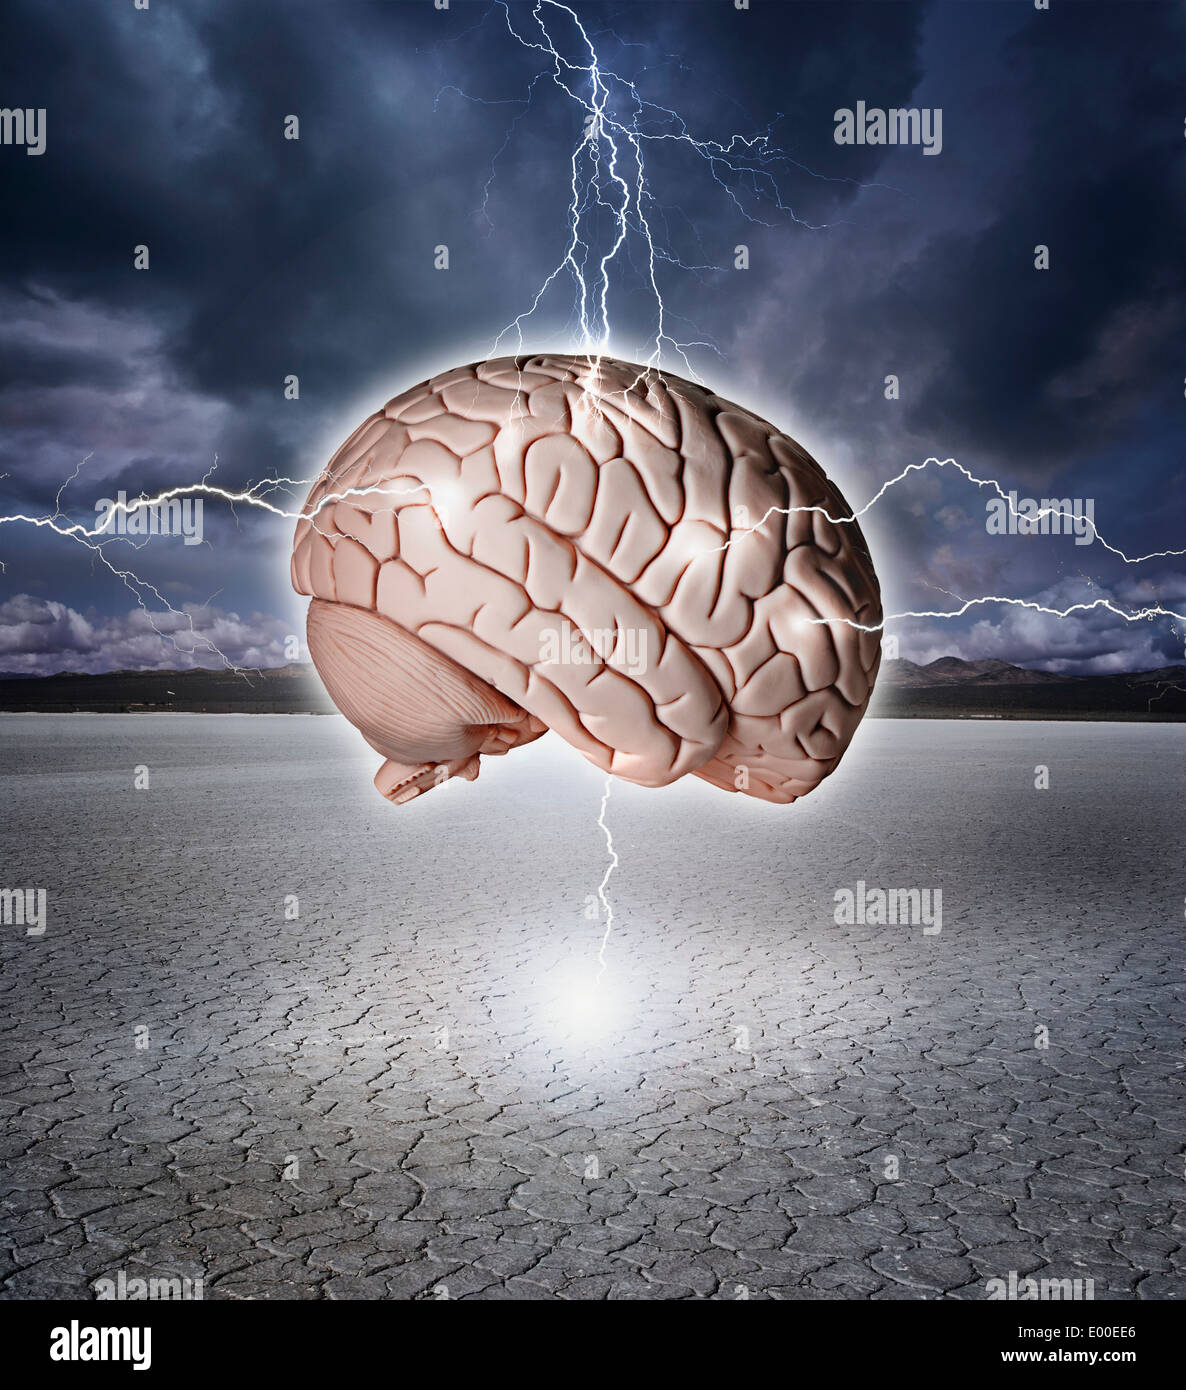 Brain being shocked with lightning over a dry lake bed. Stock Photo